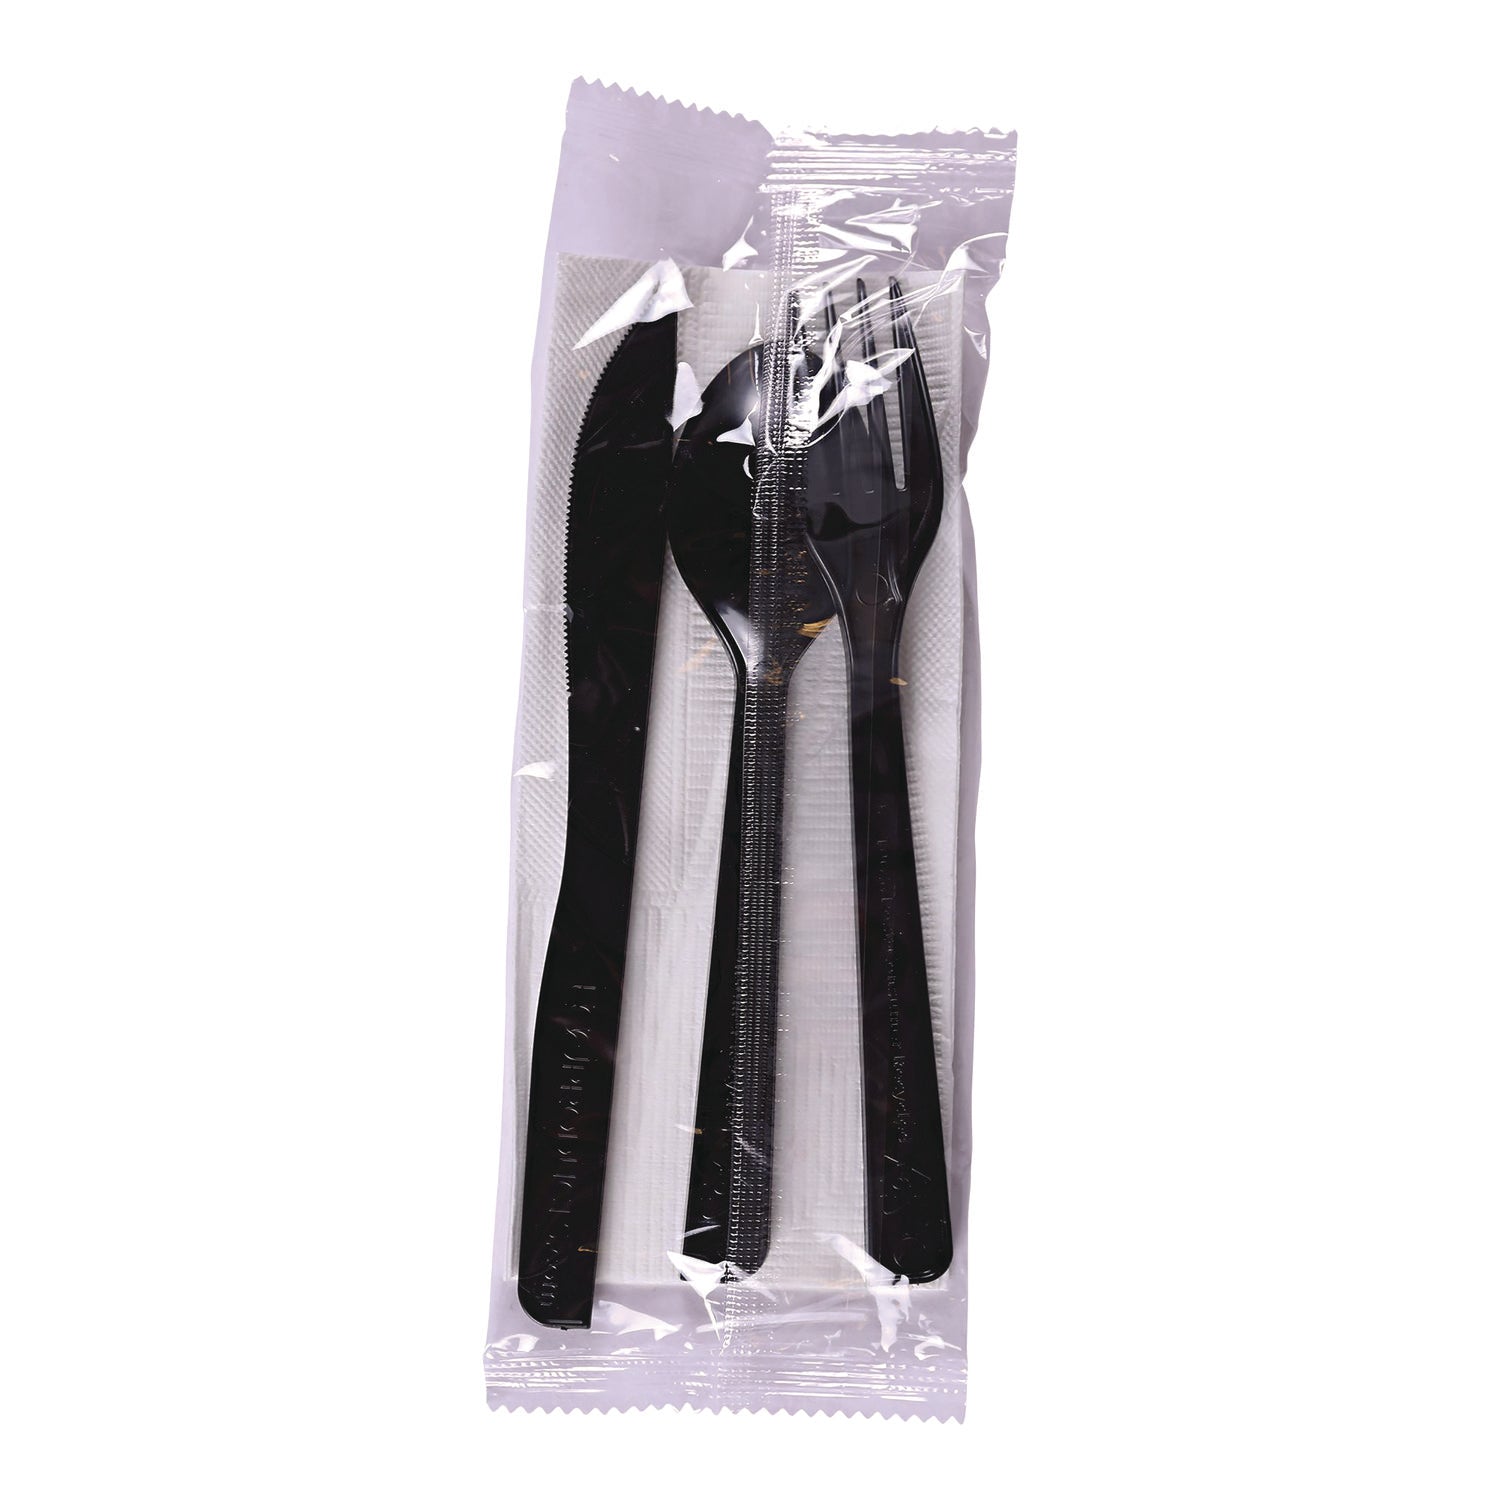 100%-recycled-content-cutlery-kit--6-250-carton_ecoeps115 - 2